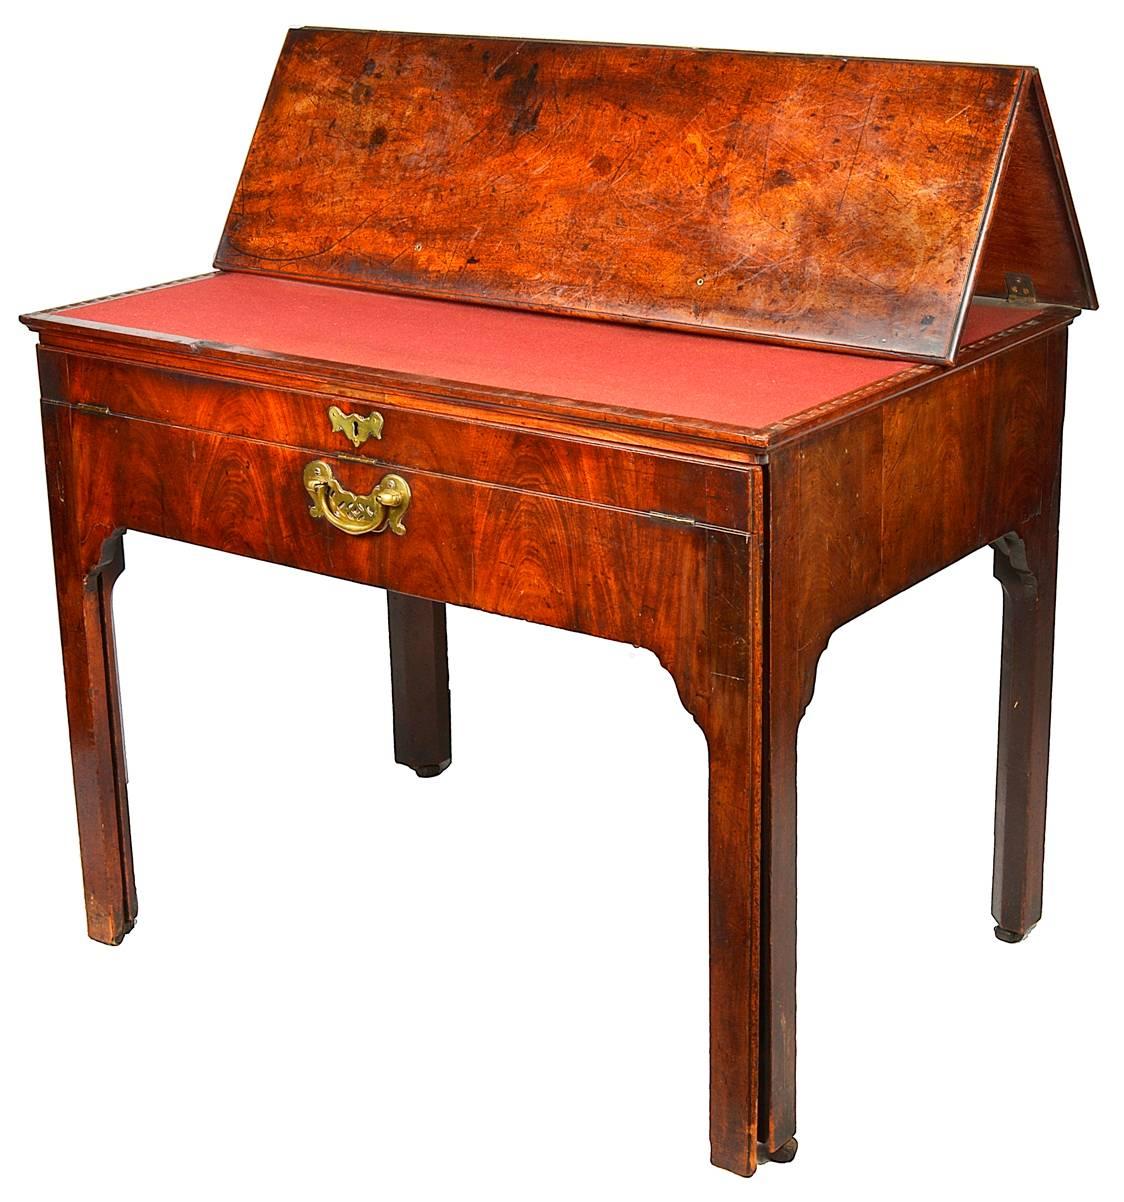 A very good quality 18th century Georgian II Mahogany architects table, having a hinged top, a sliding action compartmented drawer, raised on square section legs.